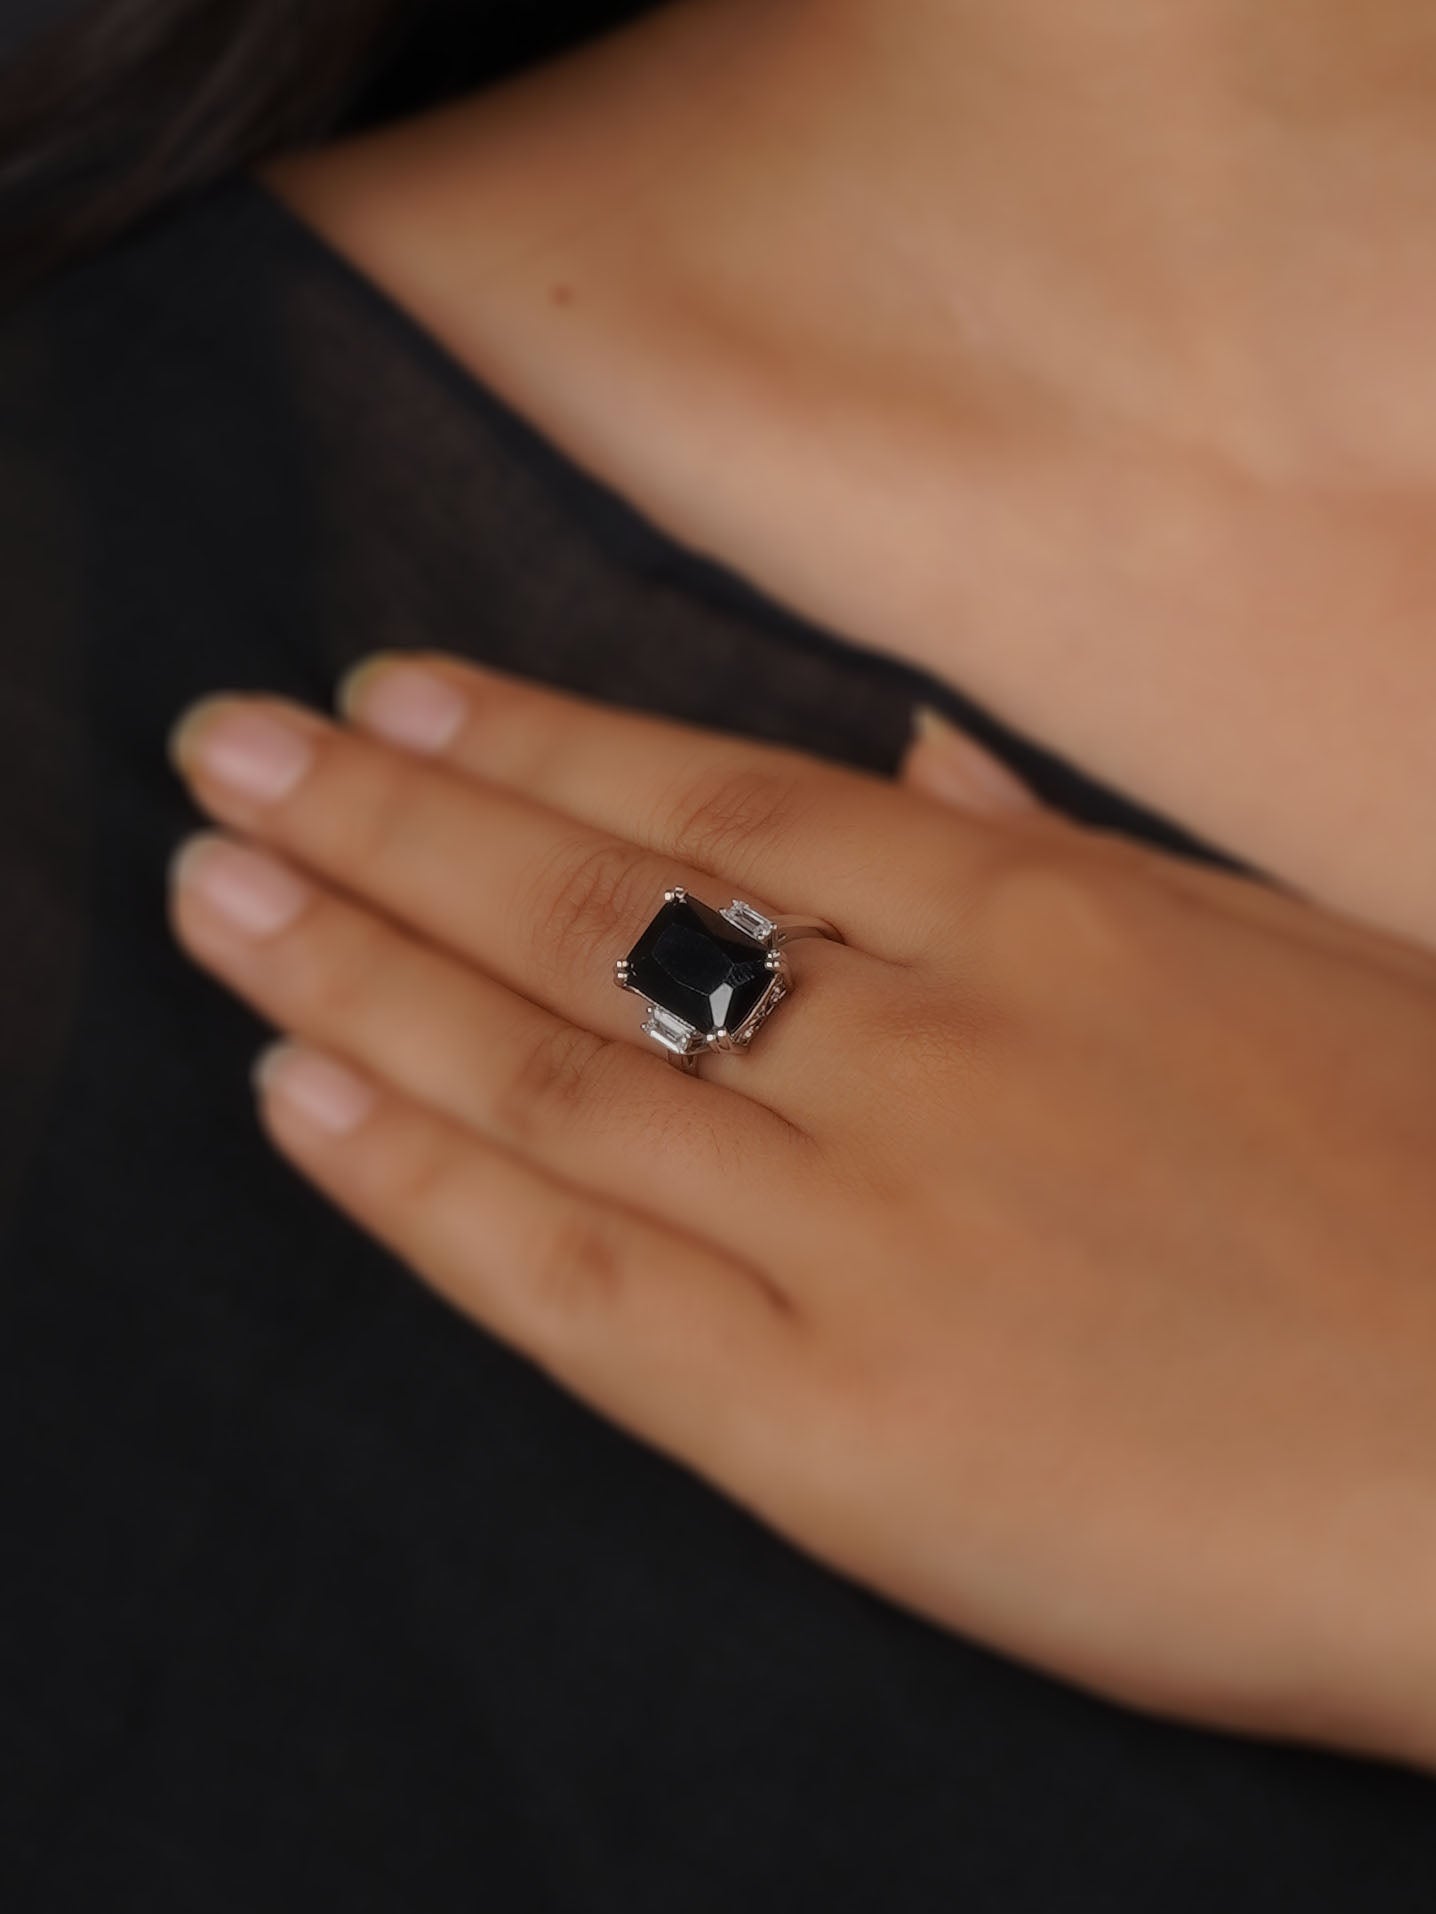 CZRNG107BK - Black Color Silver Plated Faux Diamond Ring